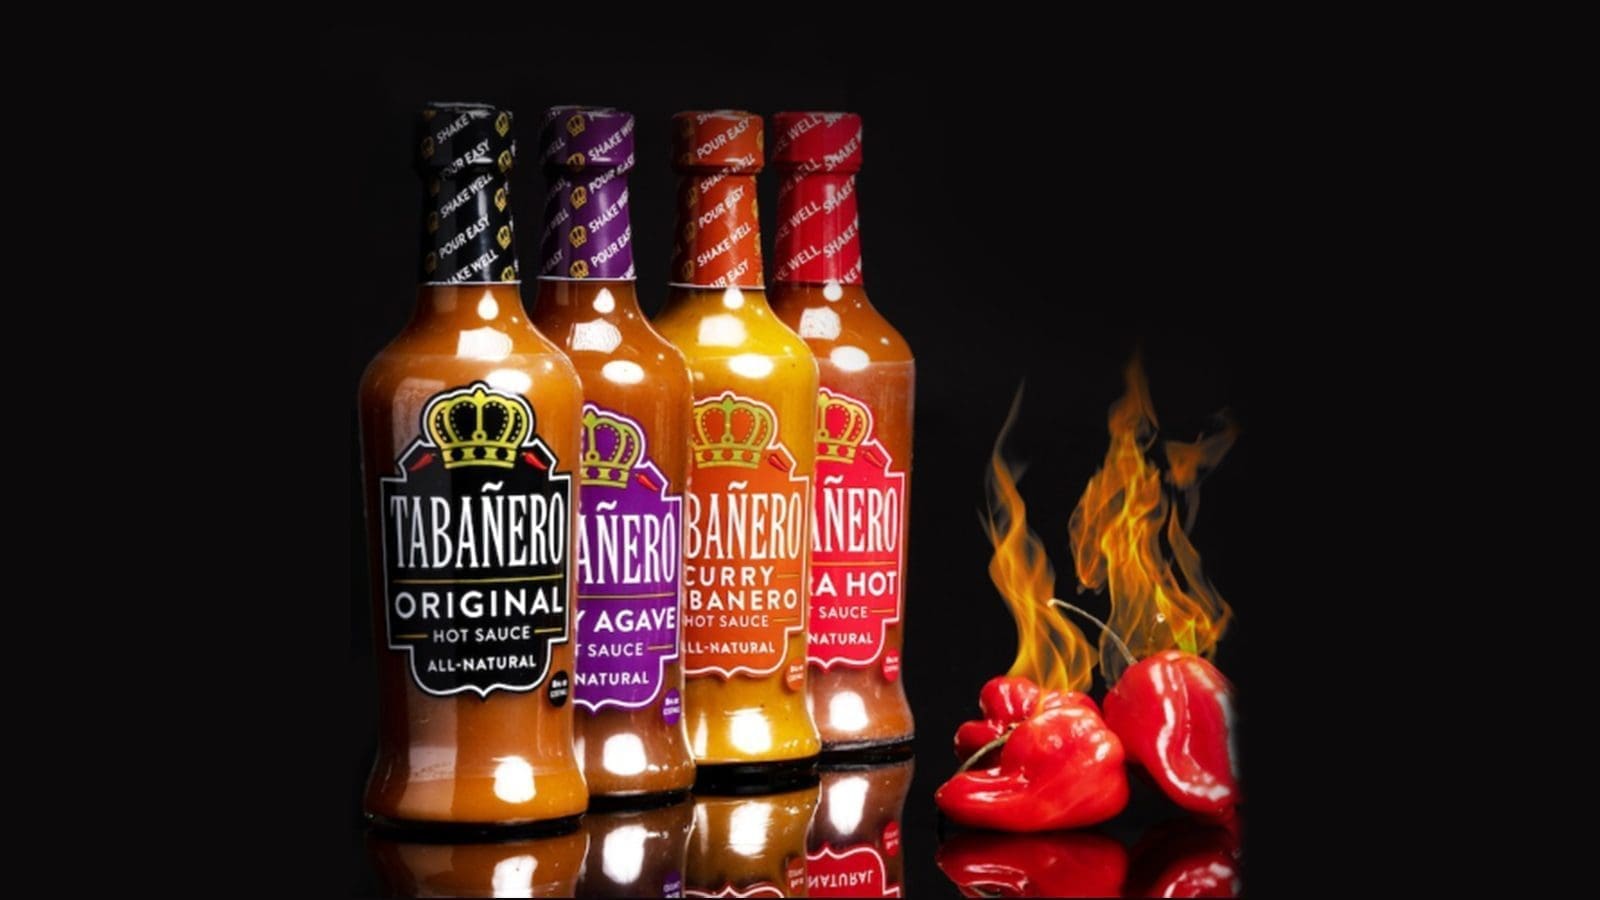 Tabañero Hot Sauce’s Fort Lauderdale facility achieves coveted Safe Quality Food Certification